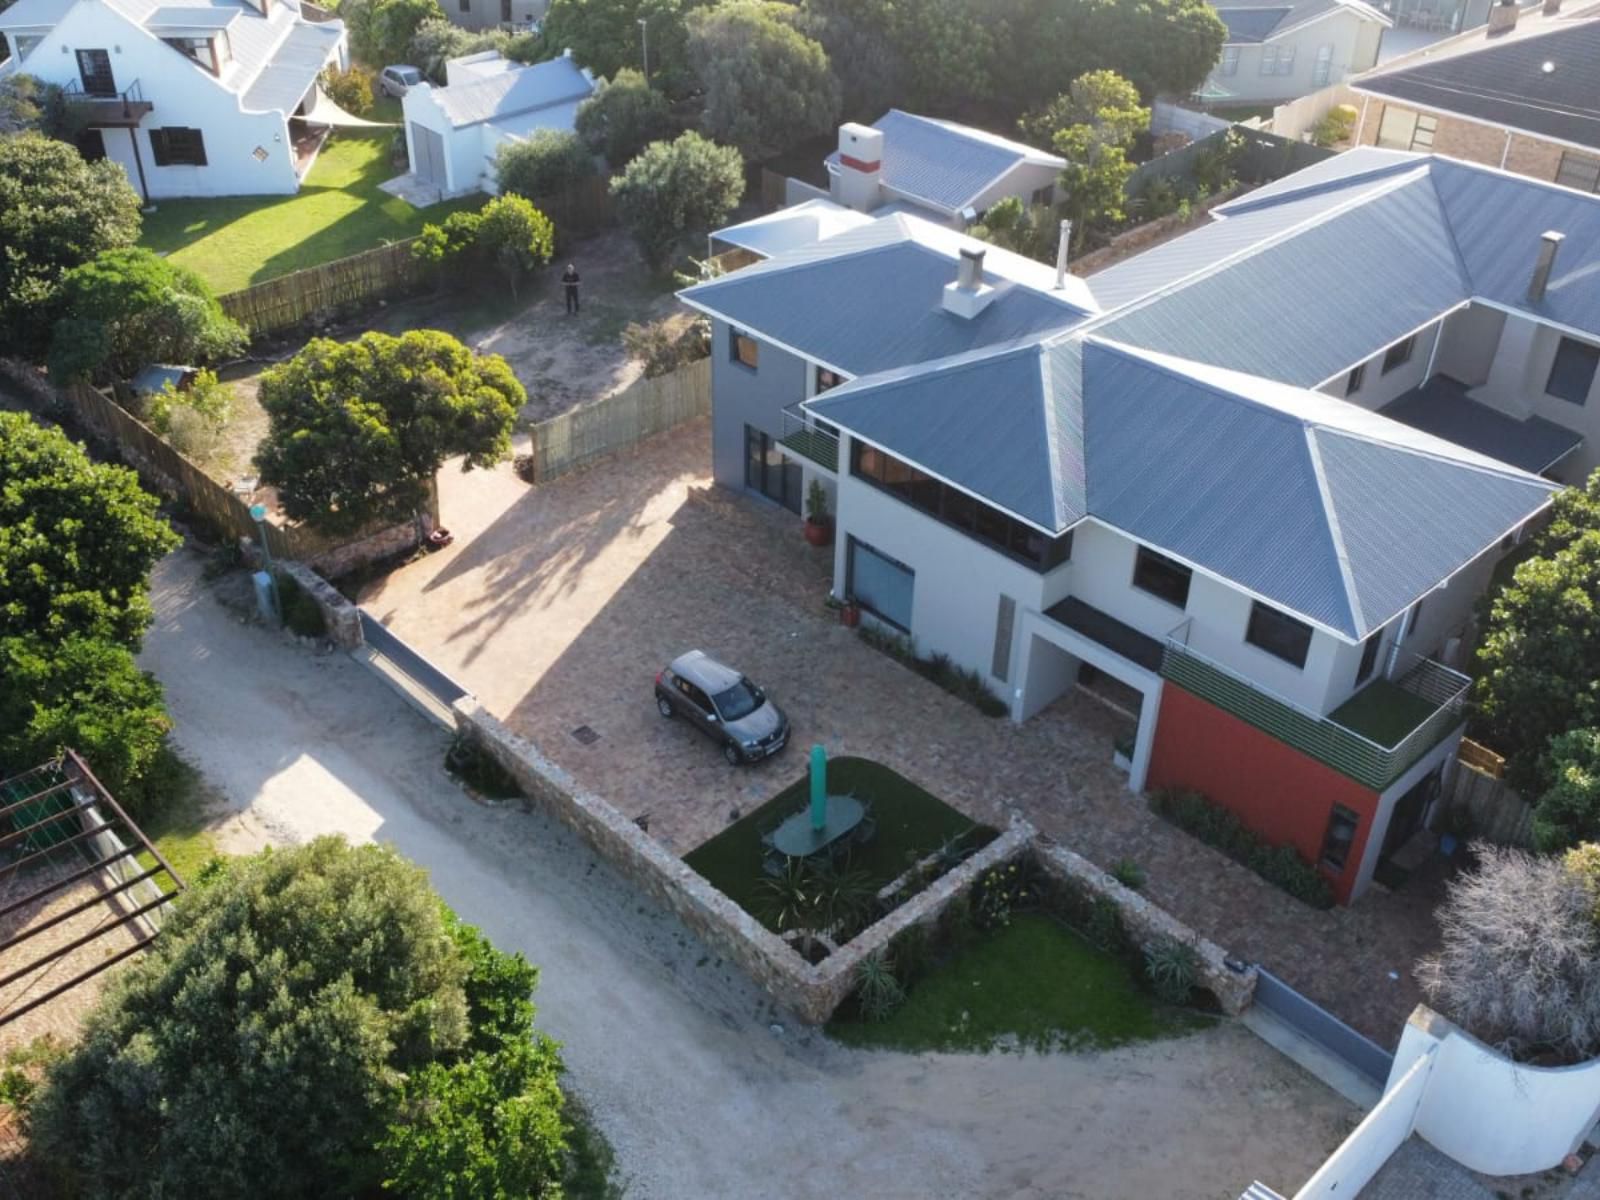 Karibu Self Catering Accommodation Vermont Za Hermanus Western Cape South Africa House, Building, Architecture